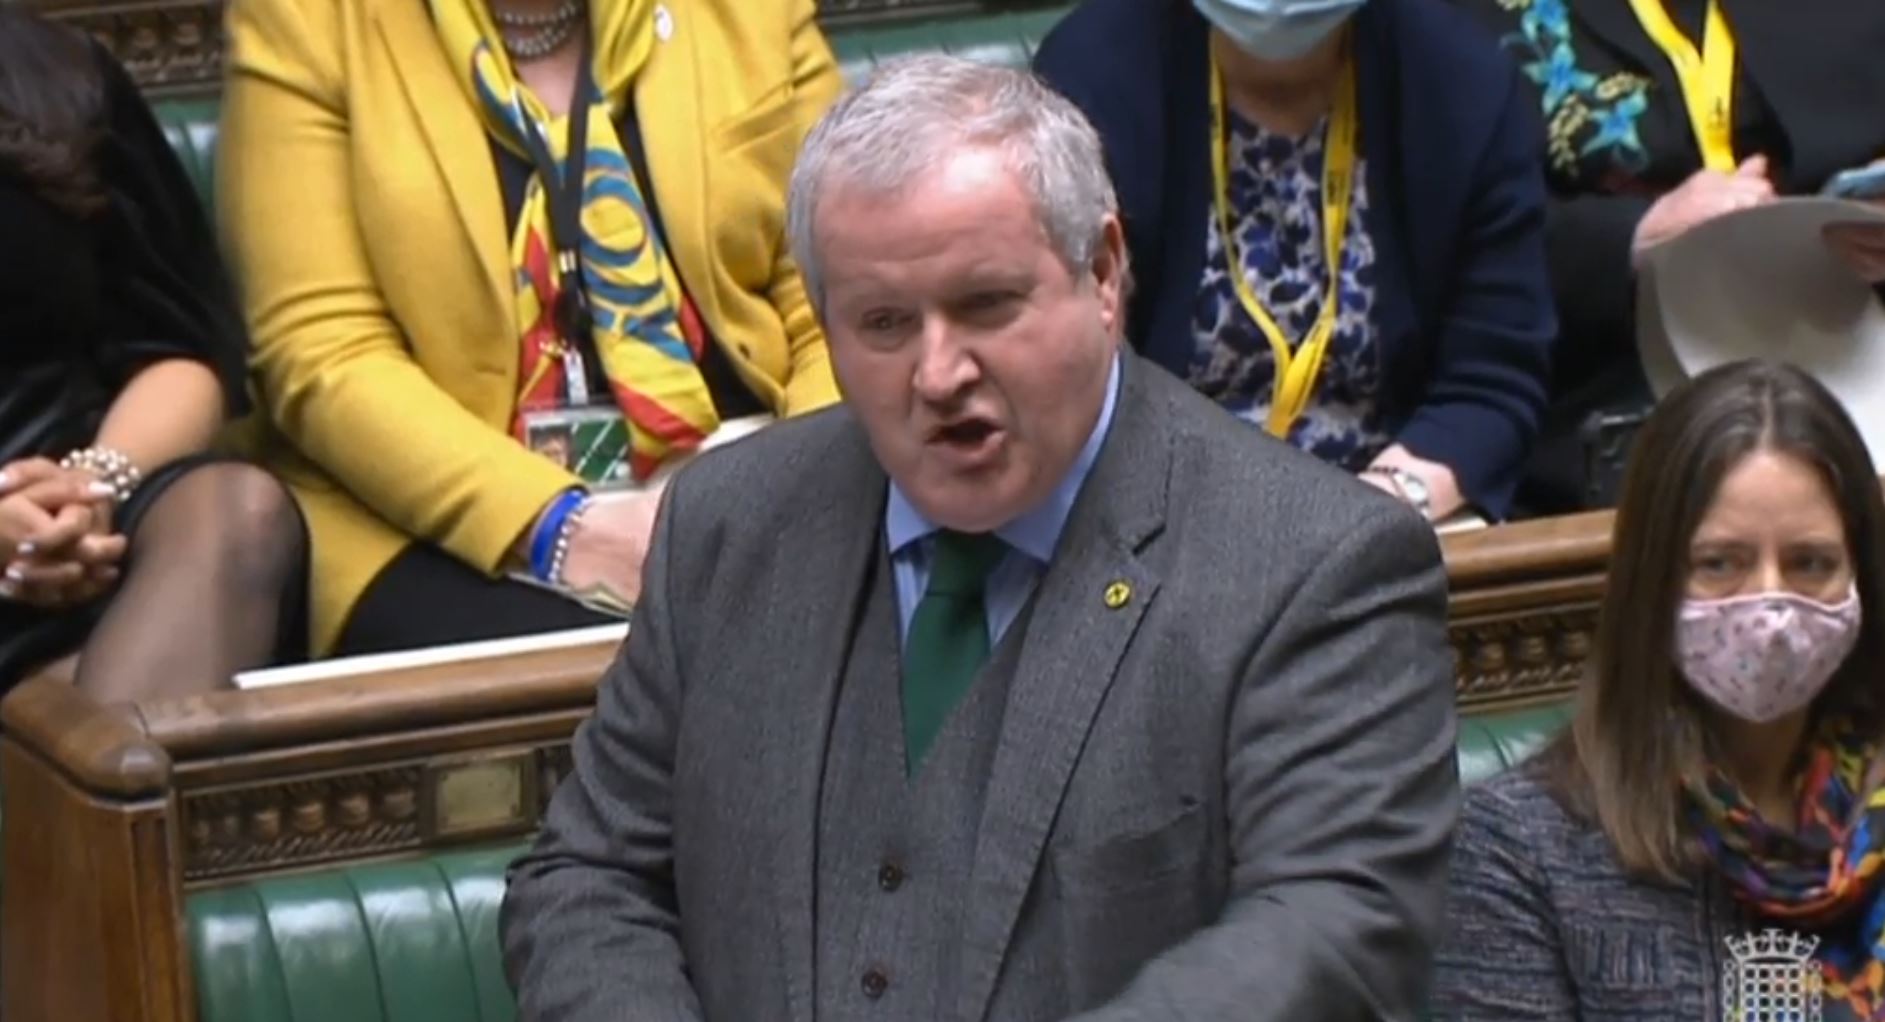 SNP Westminster leader Ian Blackford responds to a statement by Prime Minister Boris Johnson to MPs in the House of Commons on the Sue Gray report on January 31.